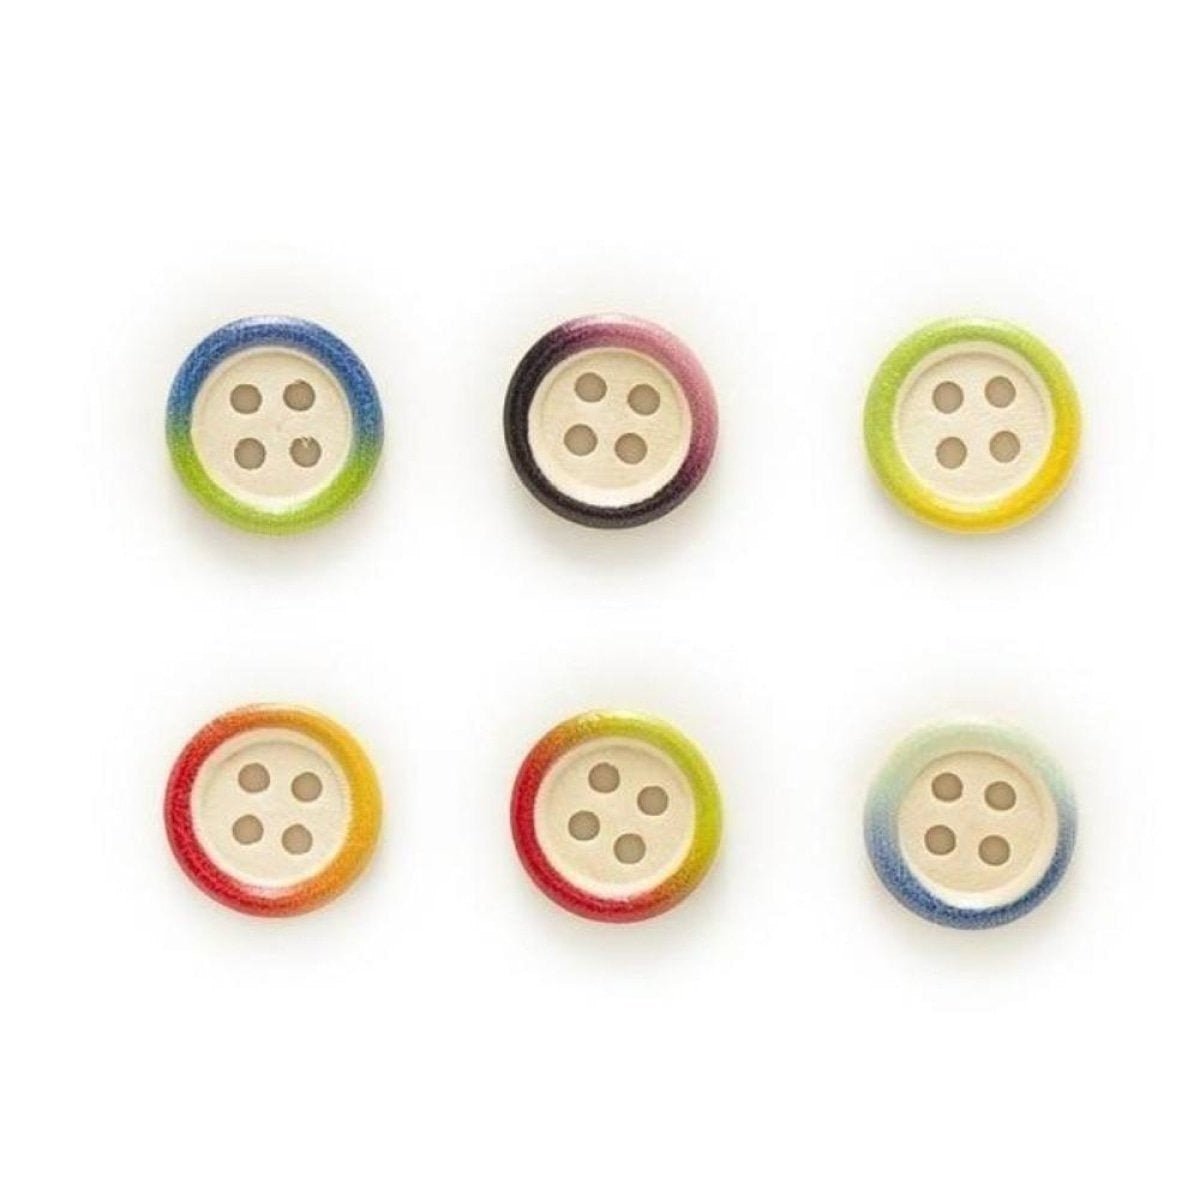 50pcs Wooden Buttons 4 Hole 15mm Multicoloured Round Clothing Sewing Colourful - Edge Multicoloured - - Asia Sell